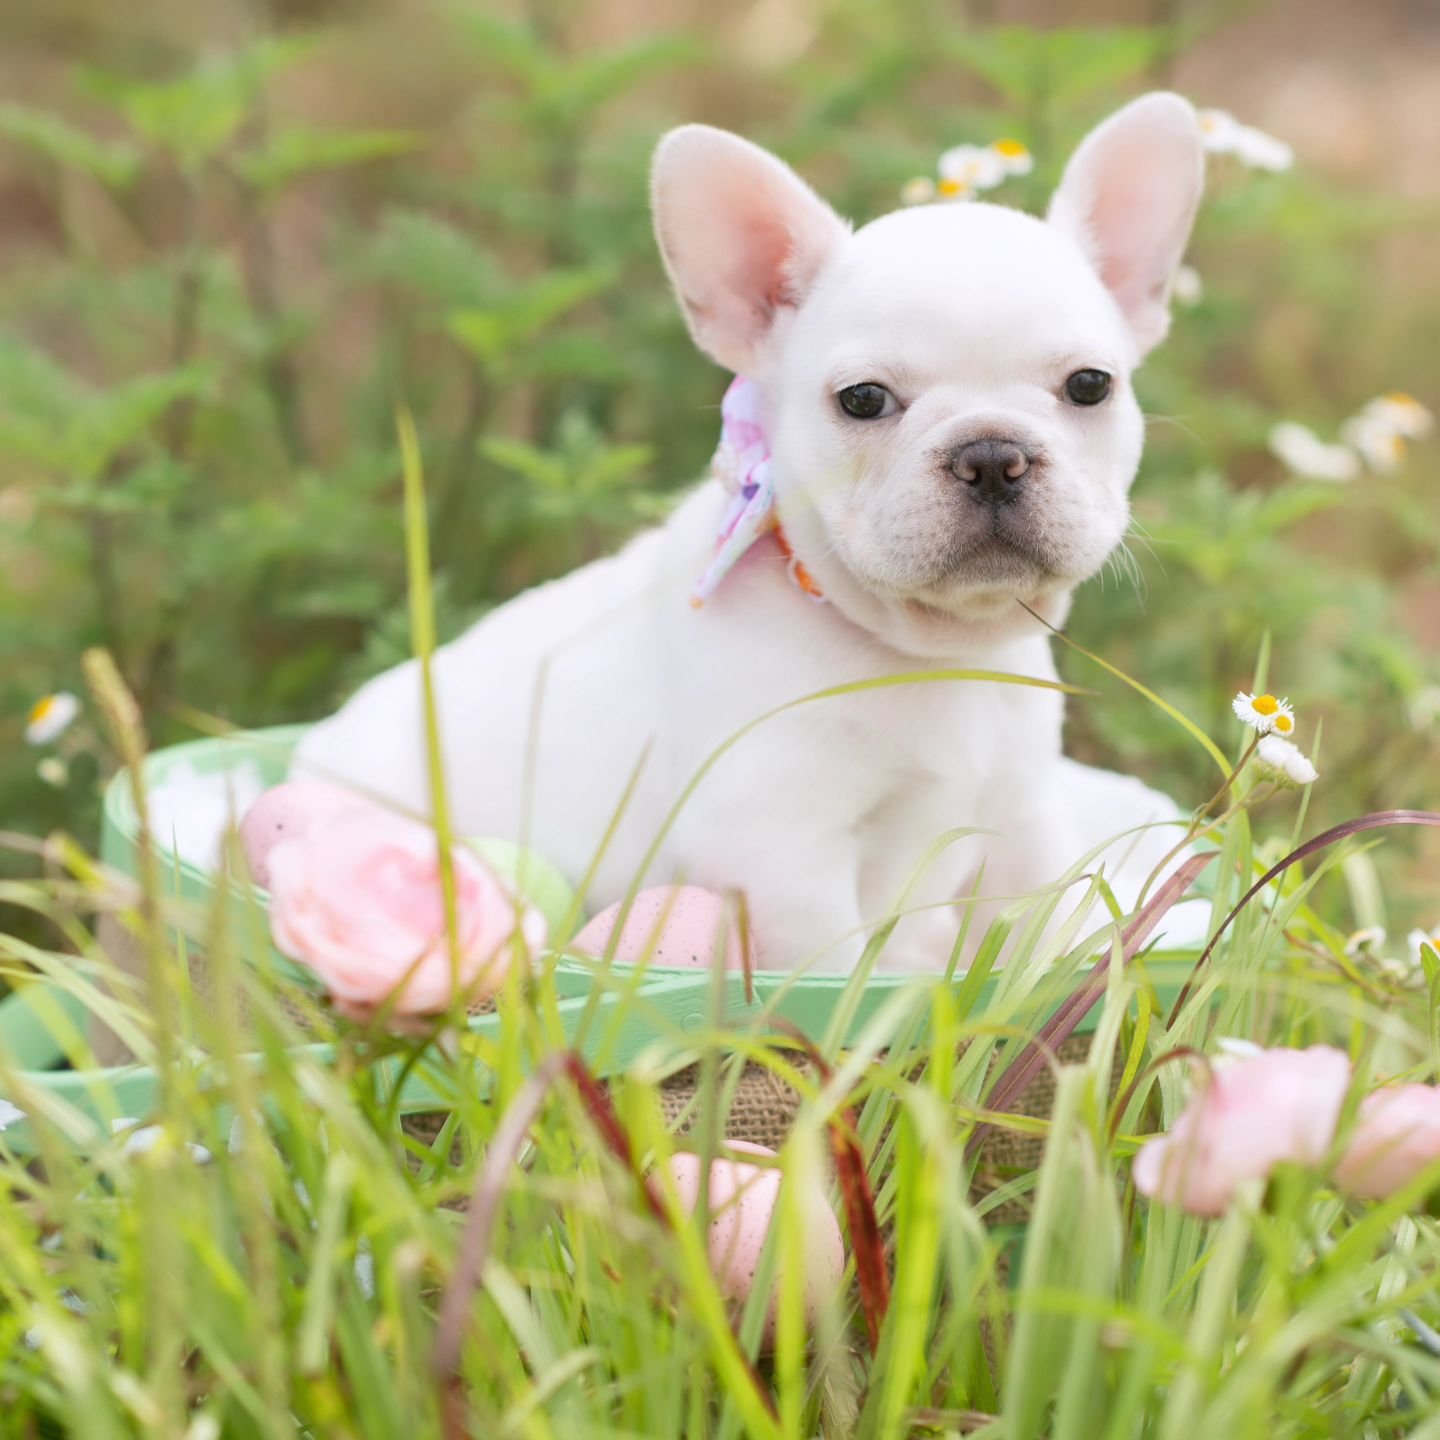 Frenchie Blossoms 🌸 &quot;In the garden of life, a frenchie is the most beautiful bloom.&quot; 🐾
.
.
.
#frenchbulldogpuppies #toppawfrenchies #dogs 
#frenchielove #bulldogbabies #frenchielife #puppylove #frenchiesofinstagram #frenchienation #bulldo